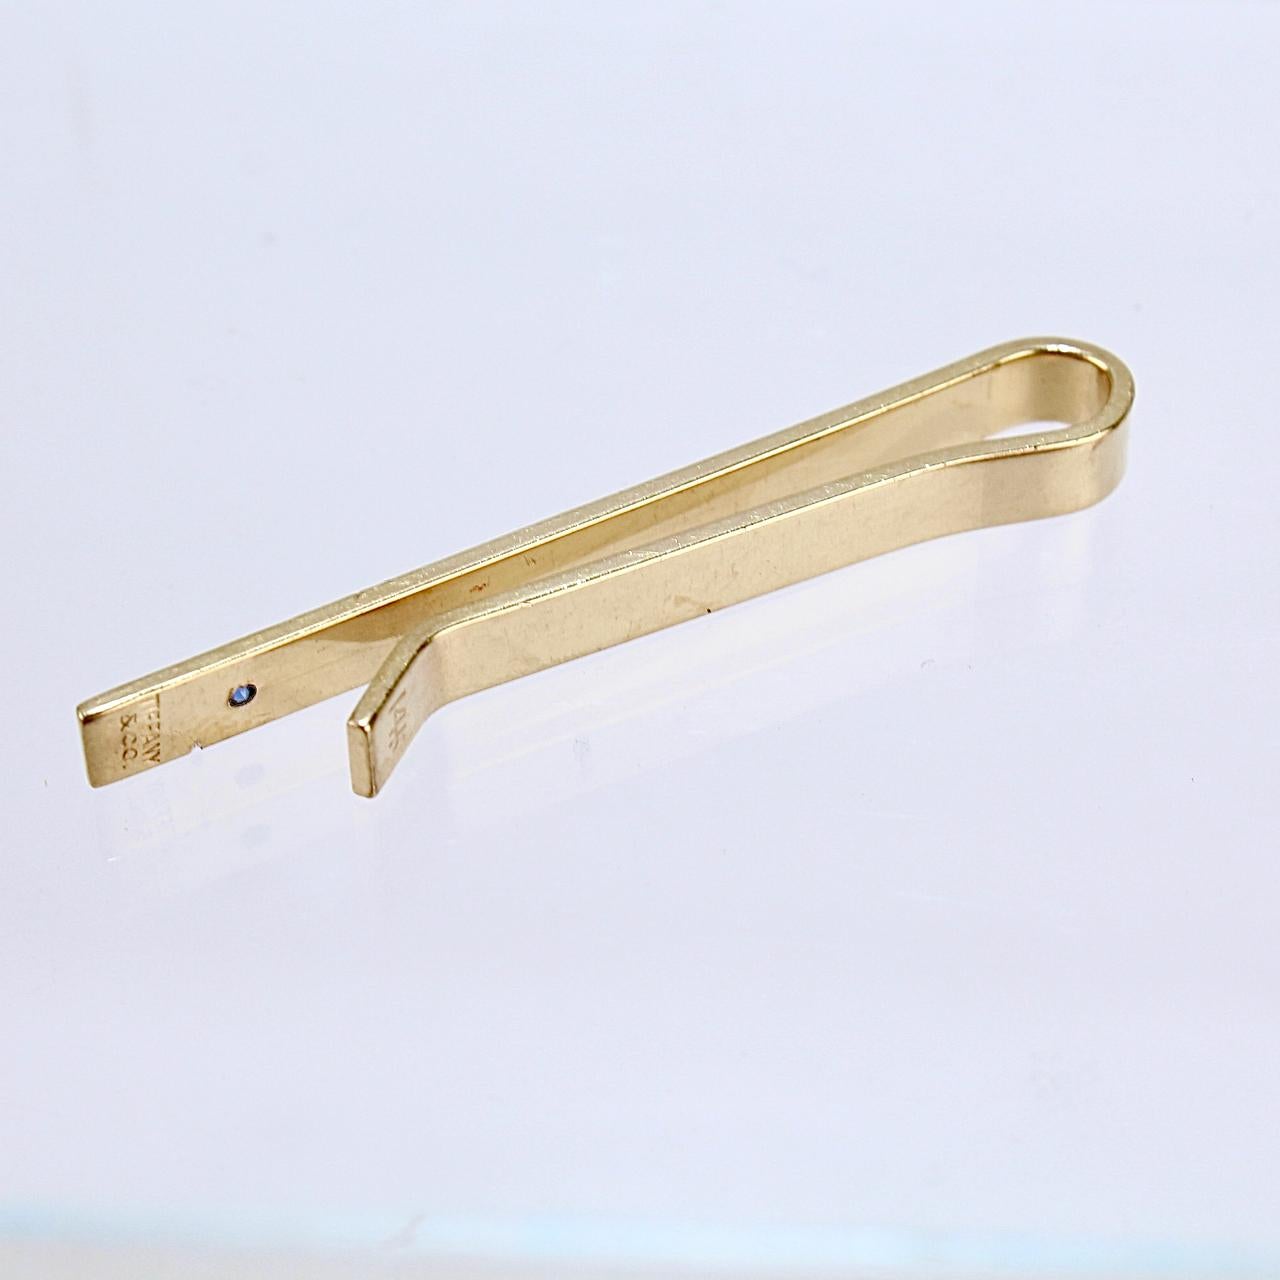 Tiffany & Co. 14 Karat Gold and Sapphire Modern Tie Clip or Tie Bar 1